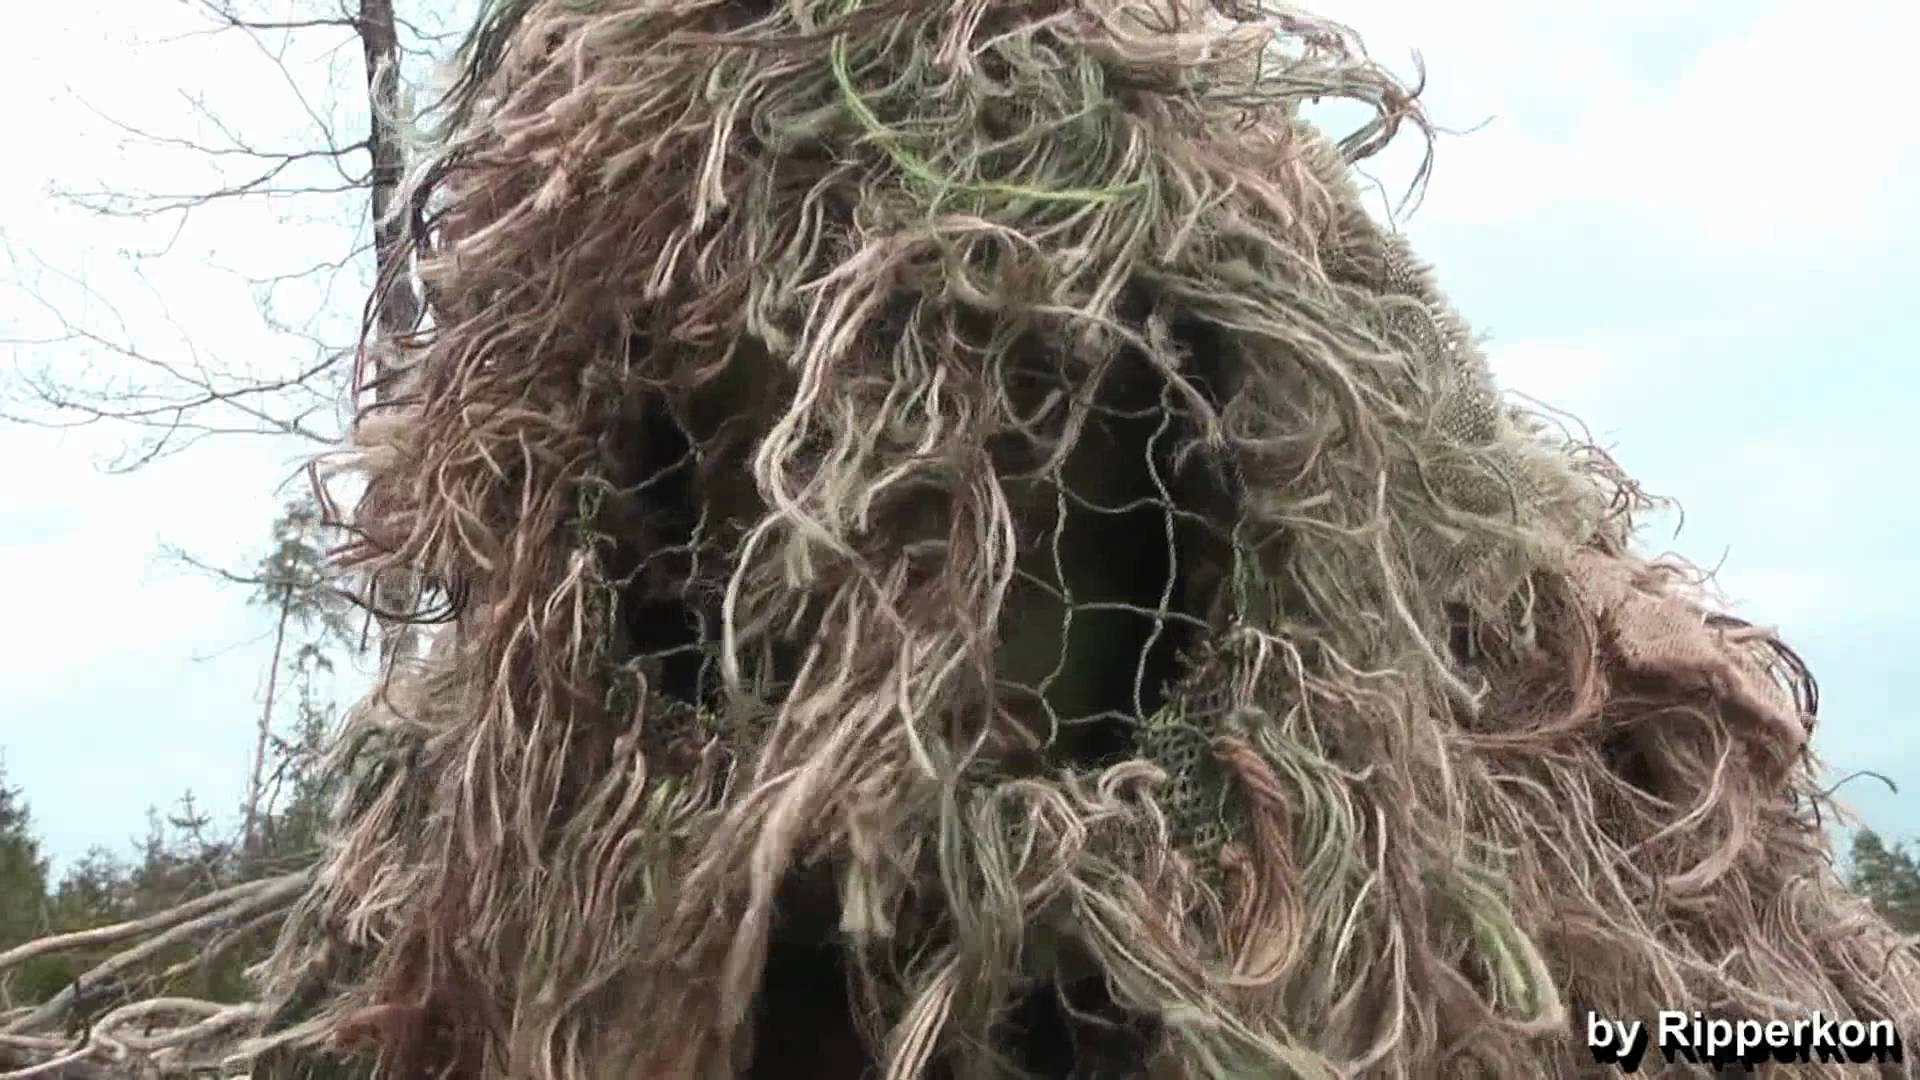 Displaying 19 Images For   Marine Ghillie Suit Wallpaper